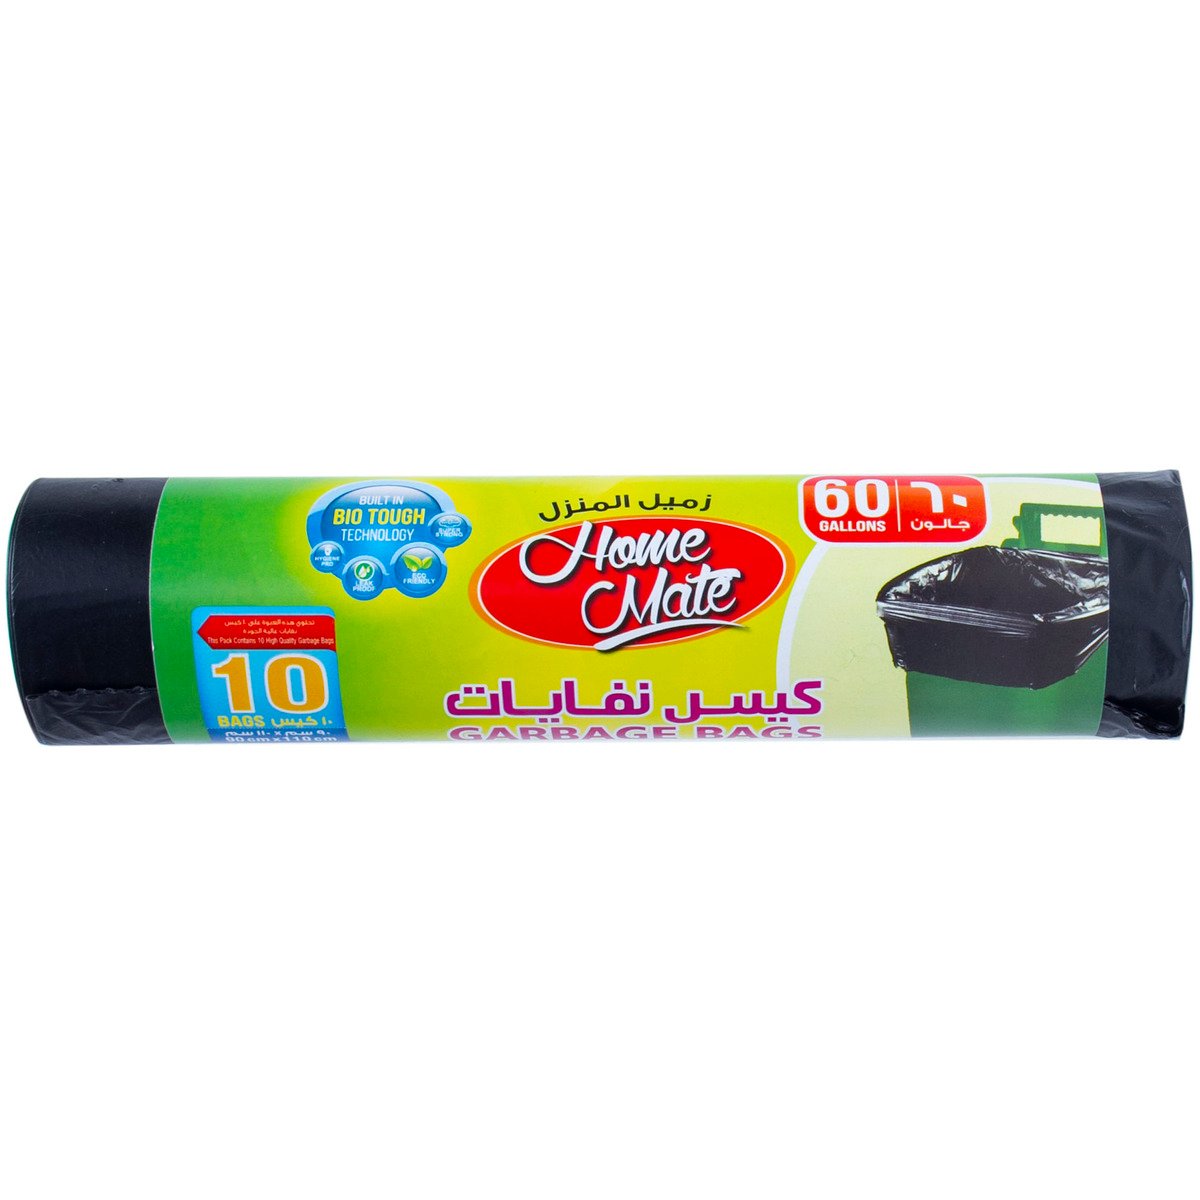 Home Mate Garbage Bags 60Gallons 90cm x 110cm 10pcs